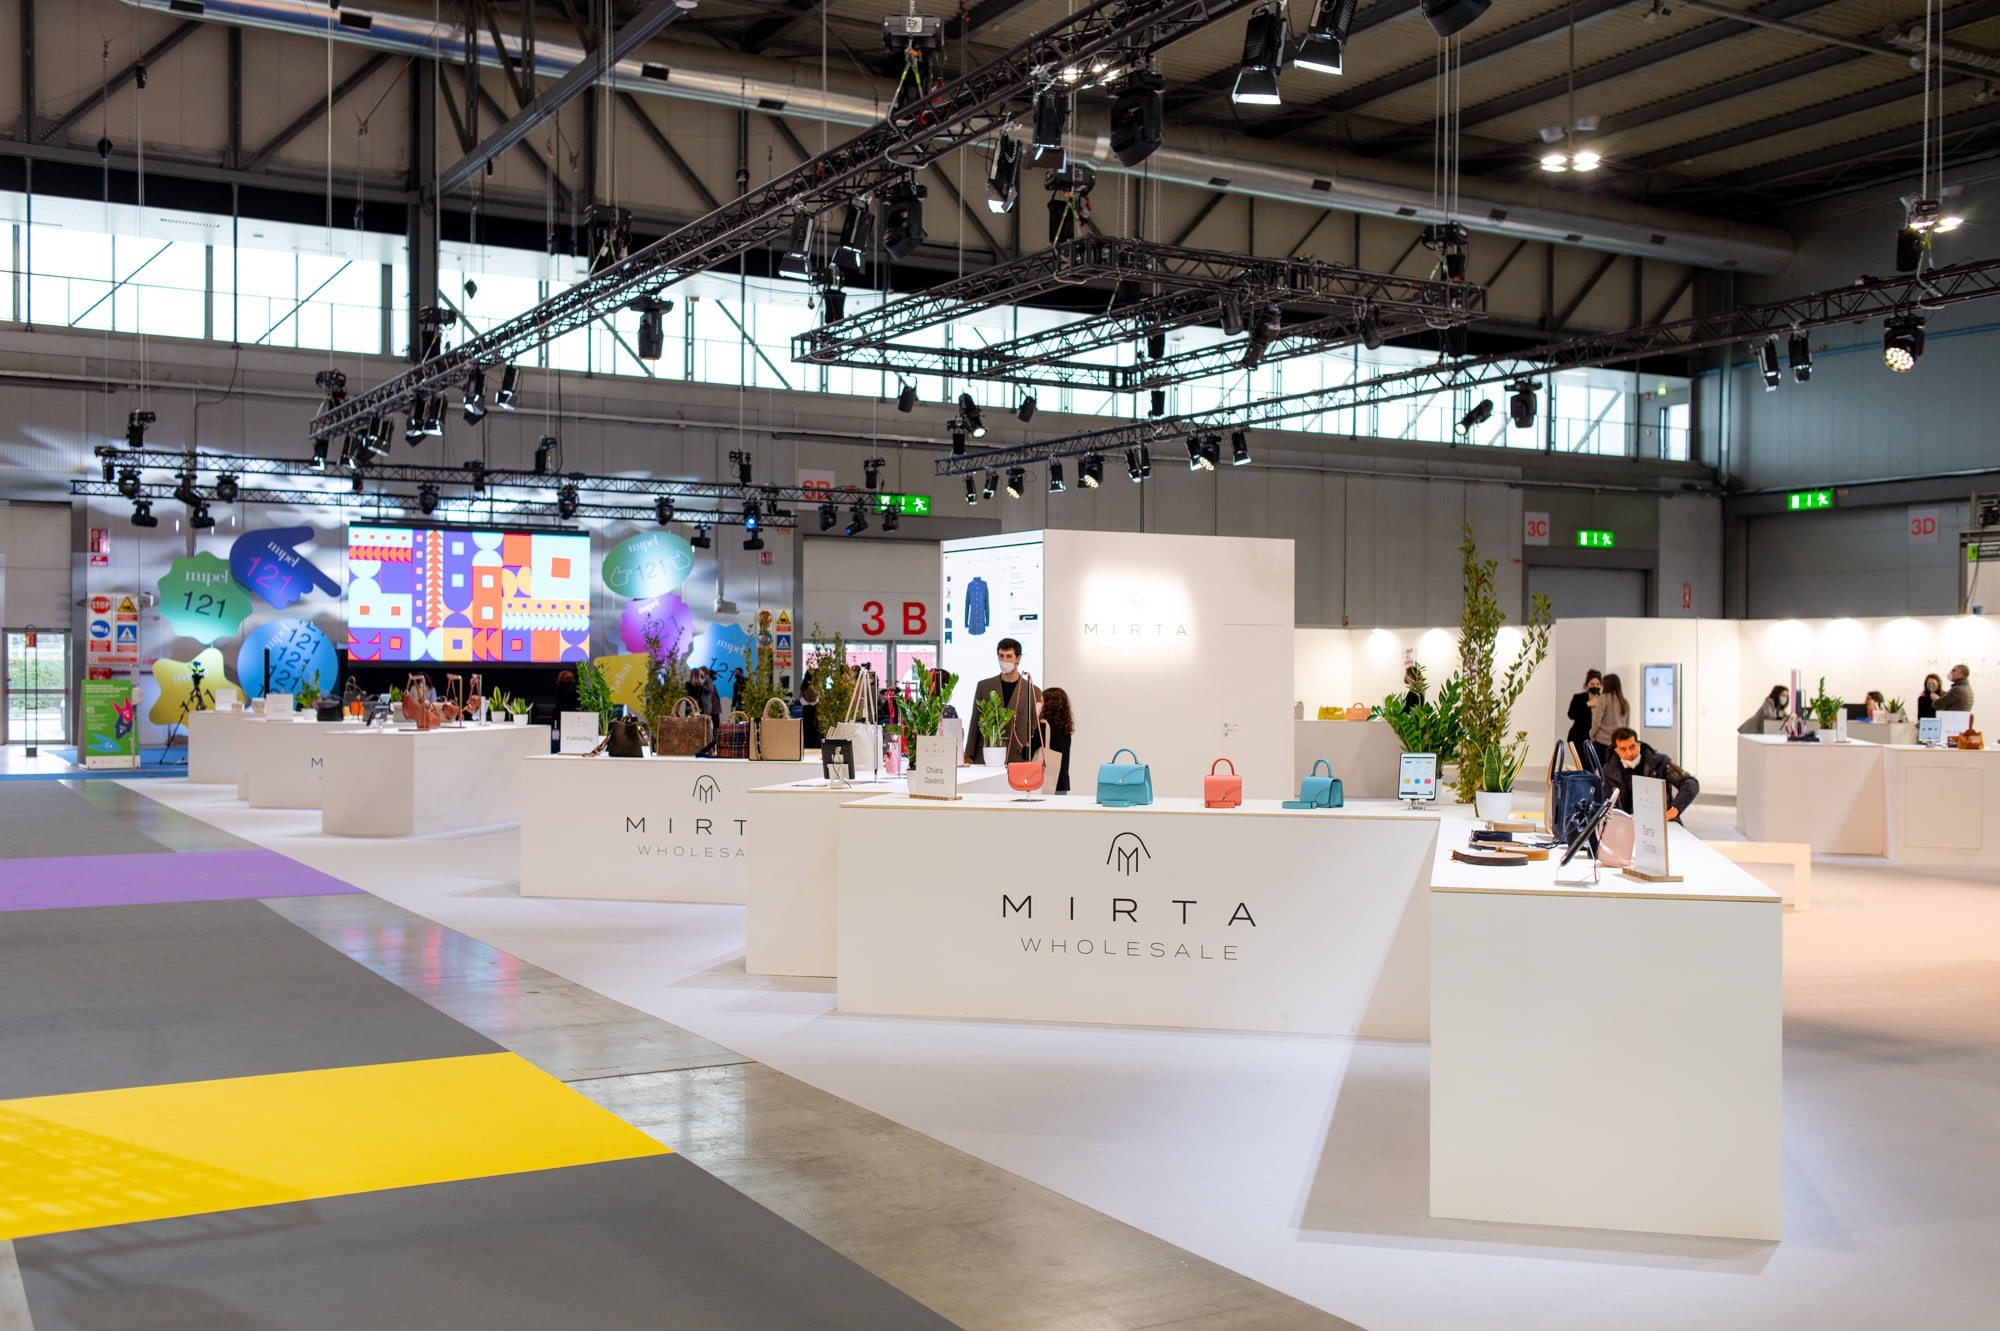 MIPEL THEBAGSHOW ' (Sep 2022), Milano, Italy - Exhibitions